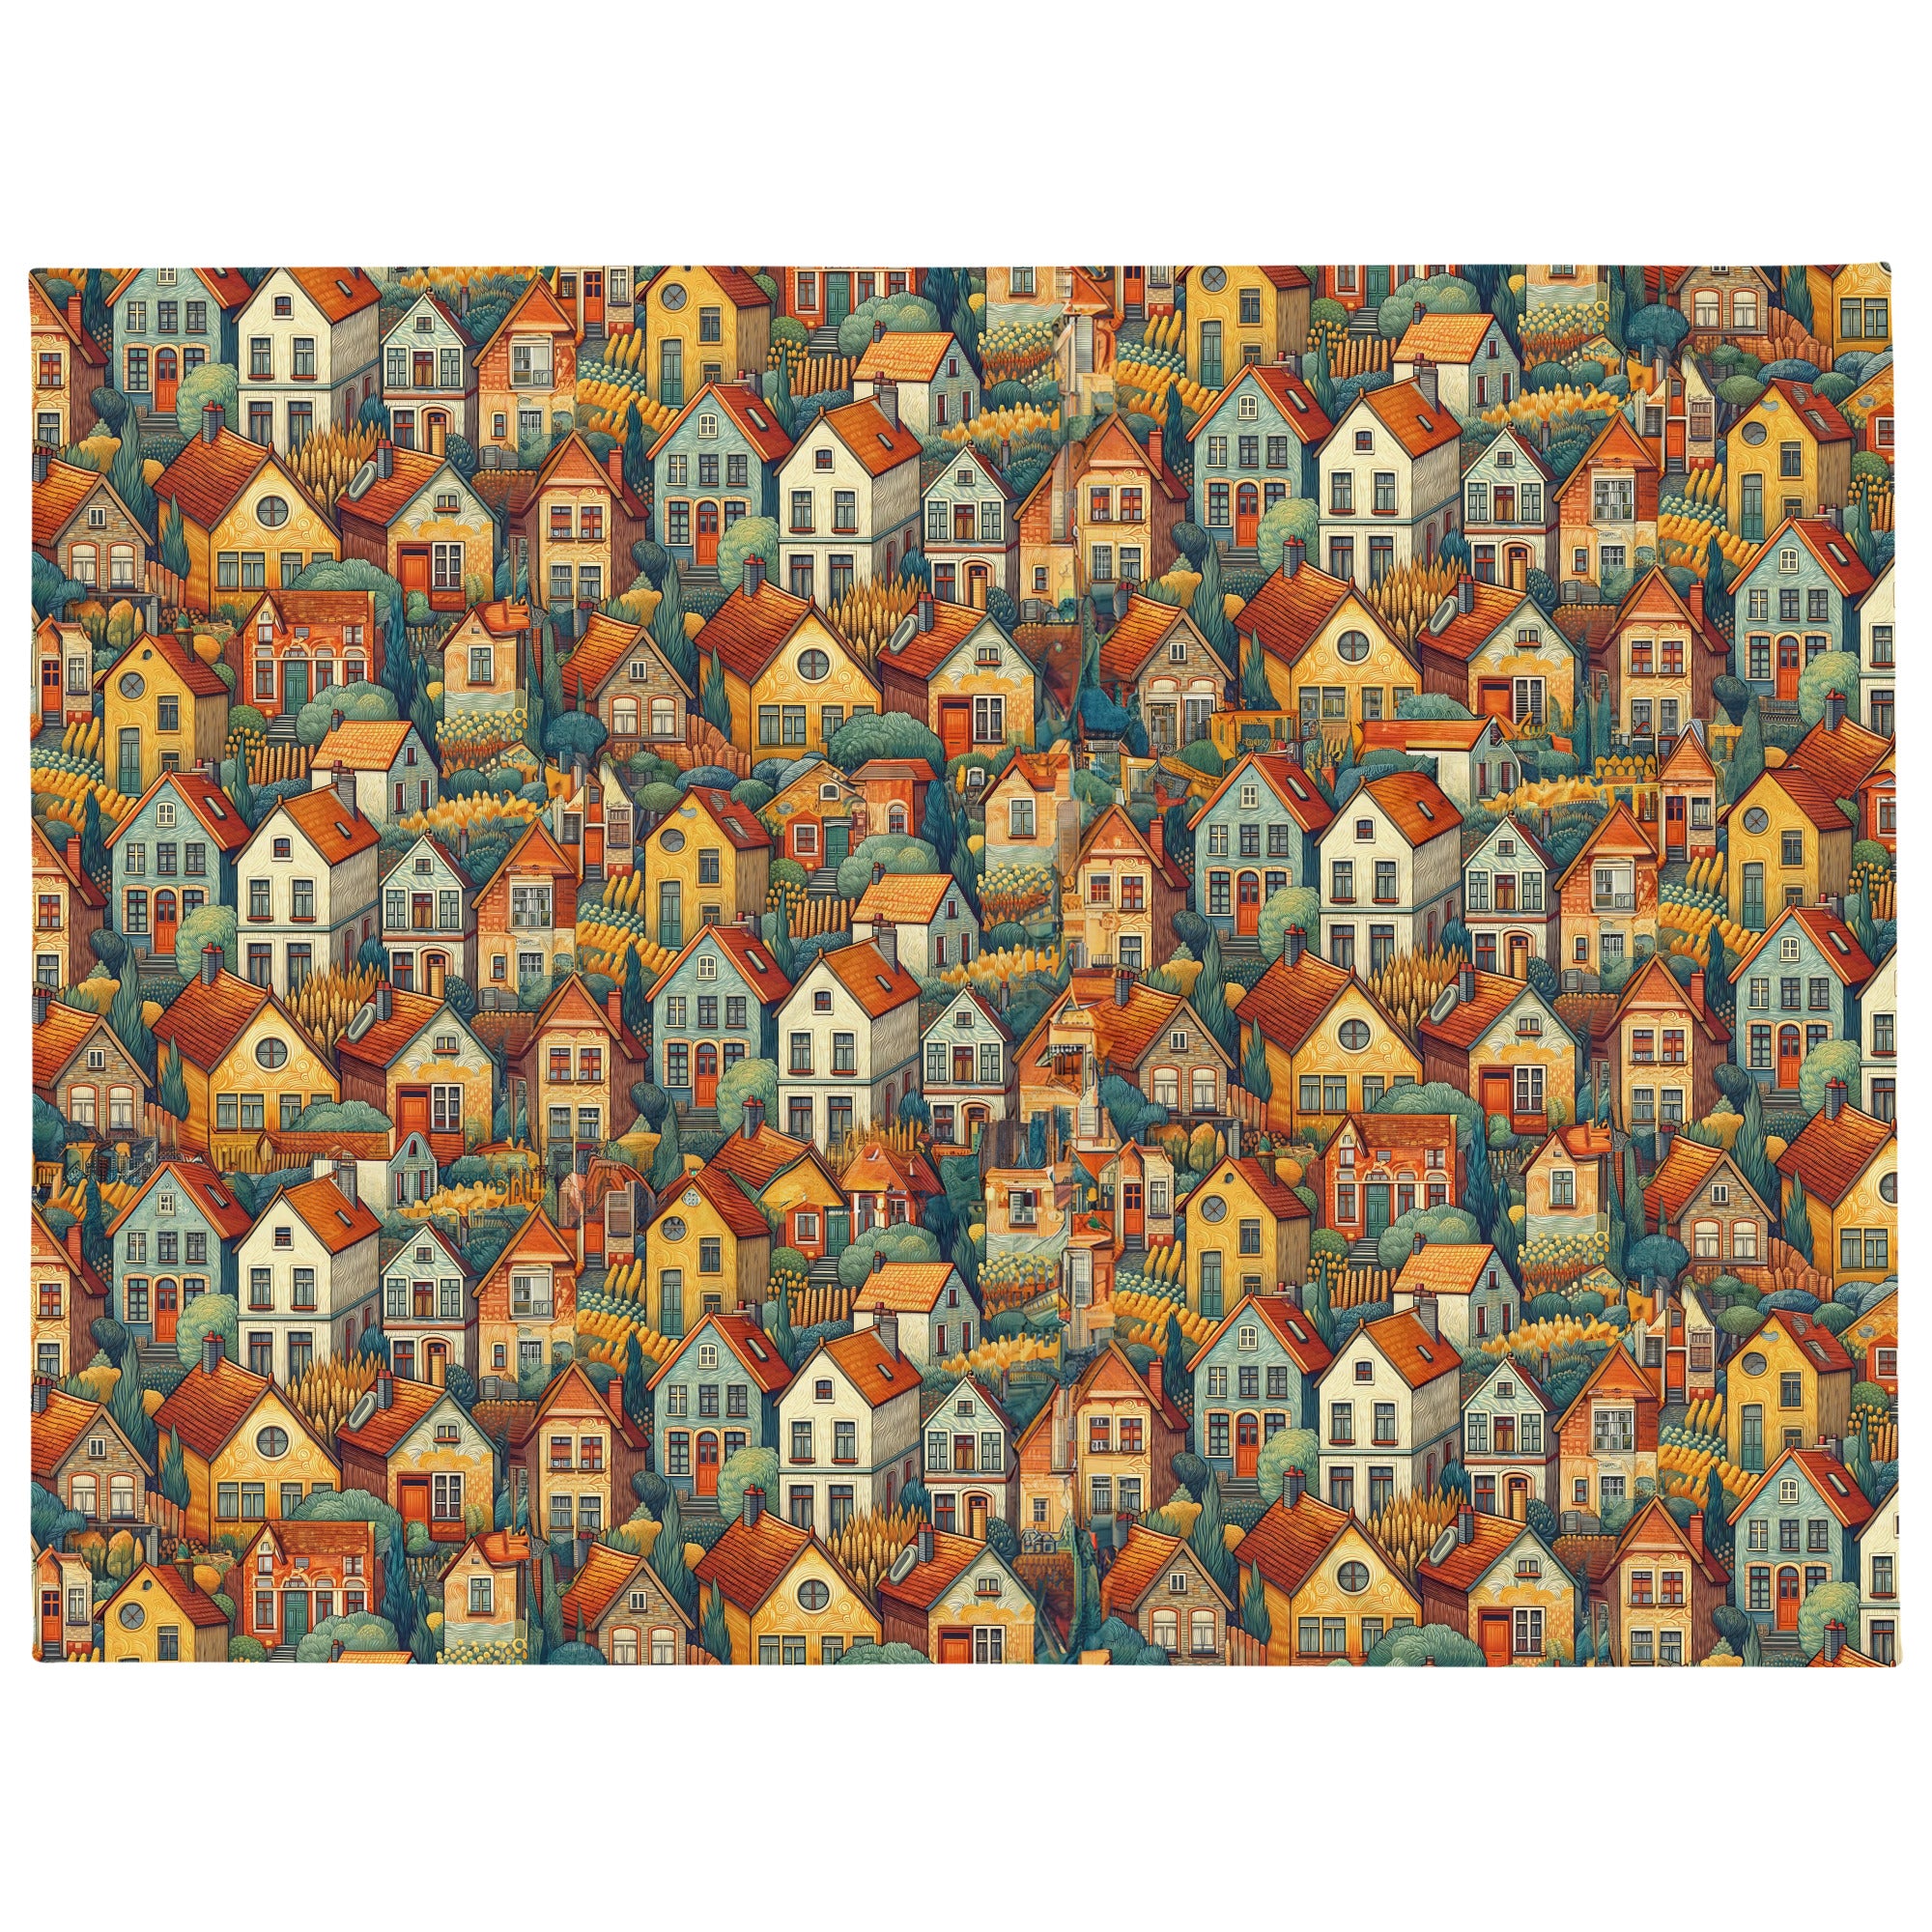 Vincent van Gogh 'Houses at Auvers' Famous Painting Throw Blanket | Premium Art Throw